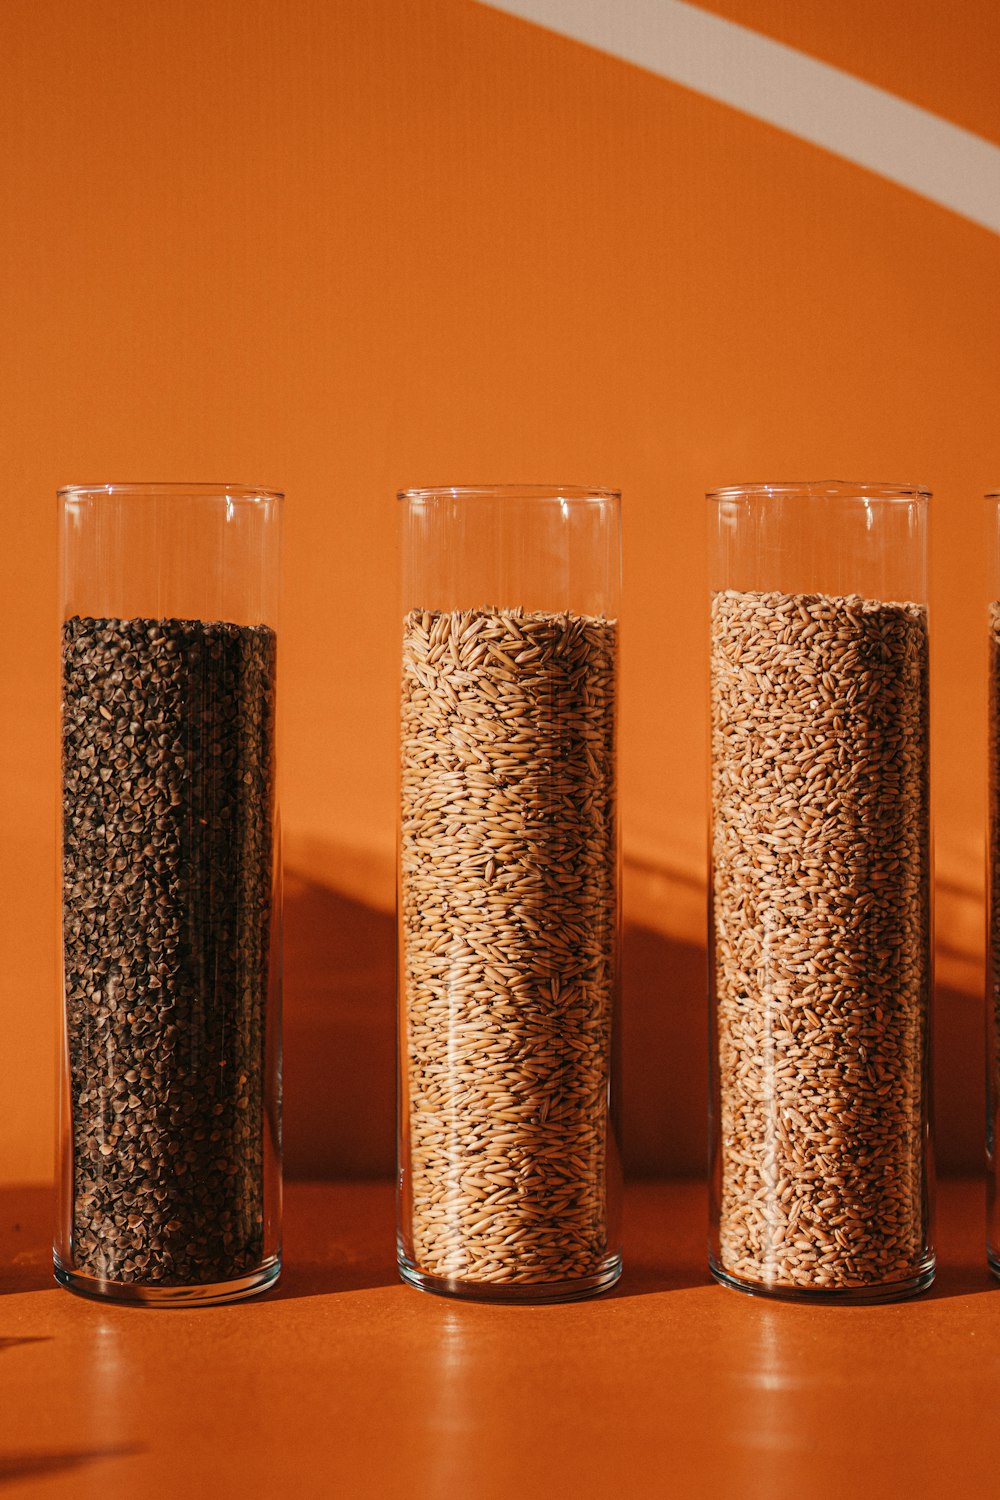 a row of three glasses filled with grains